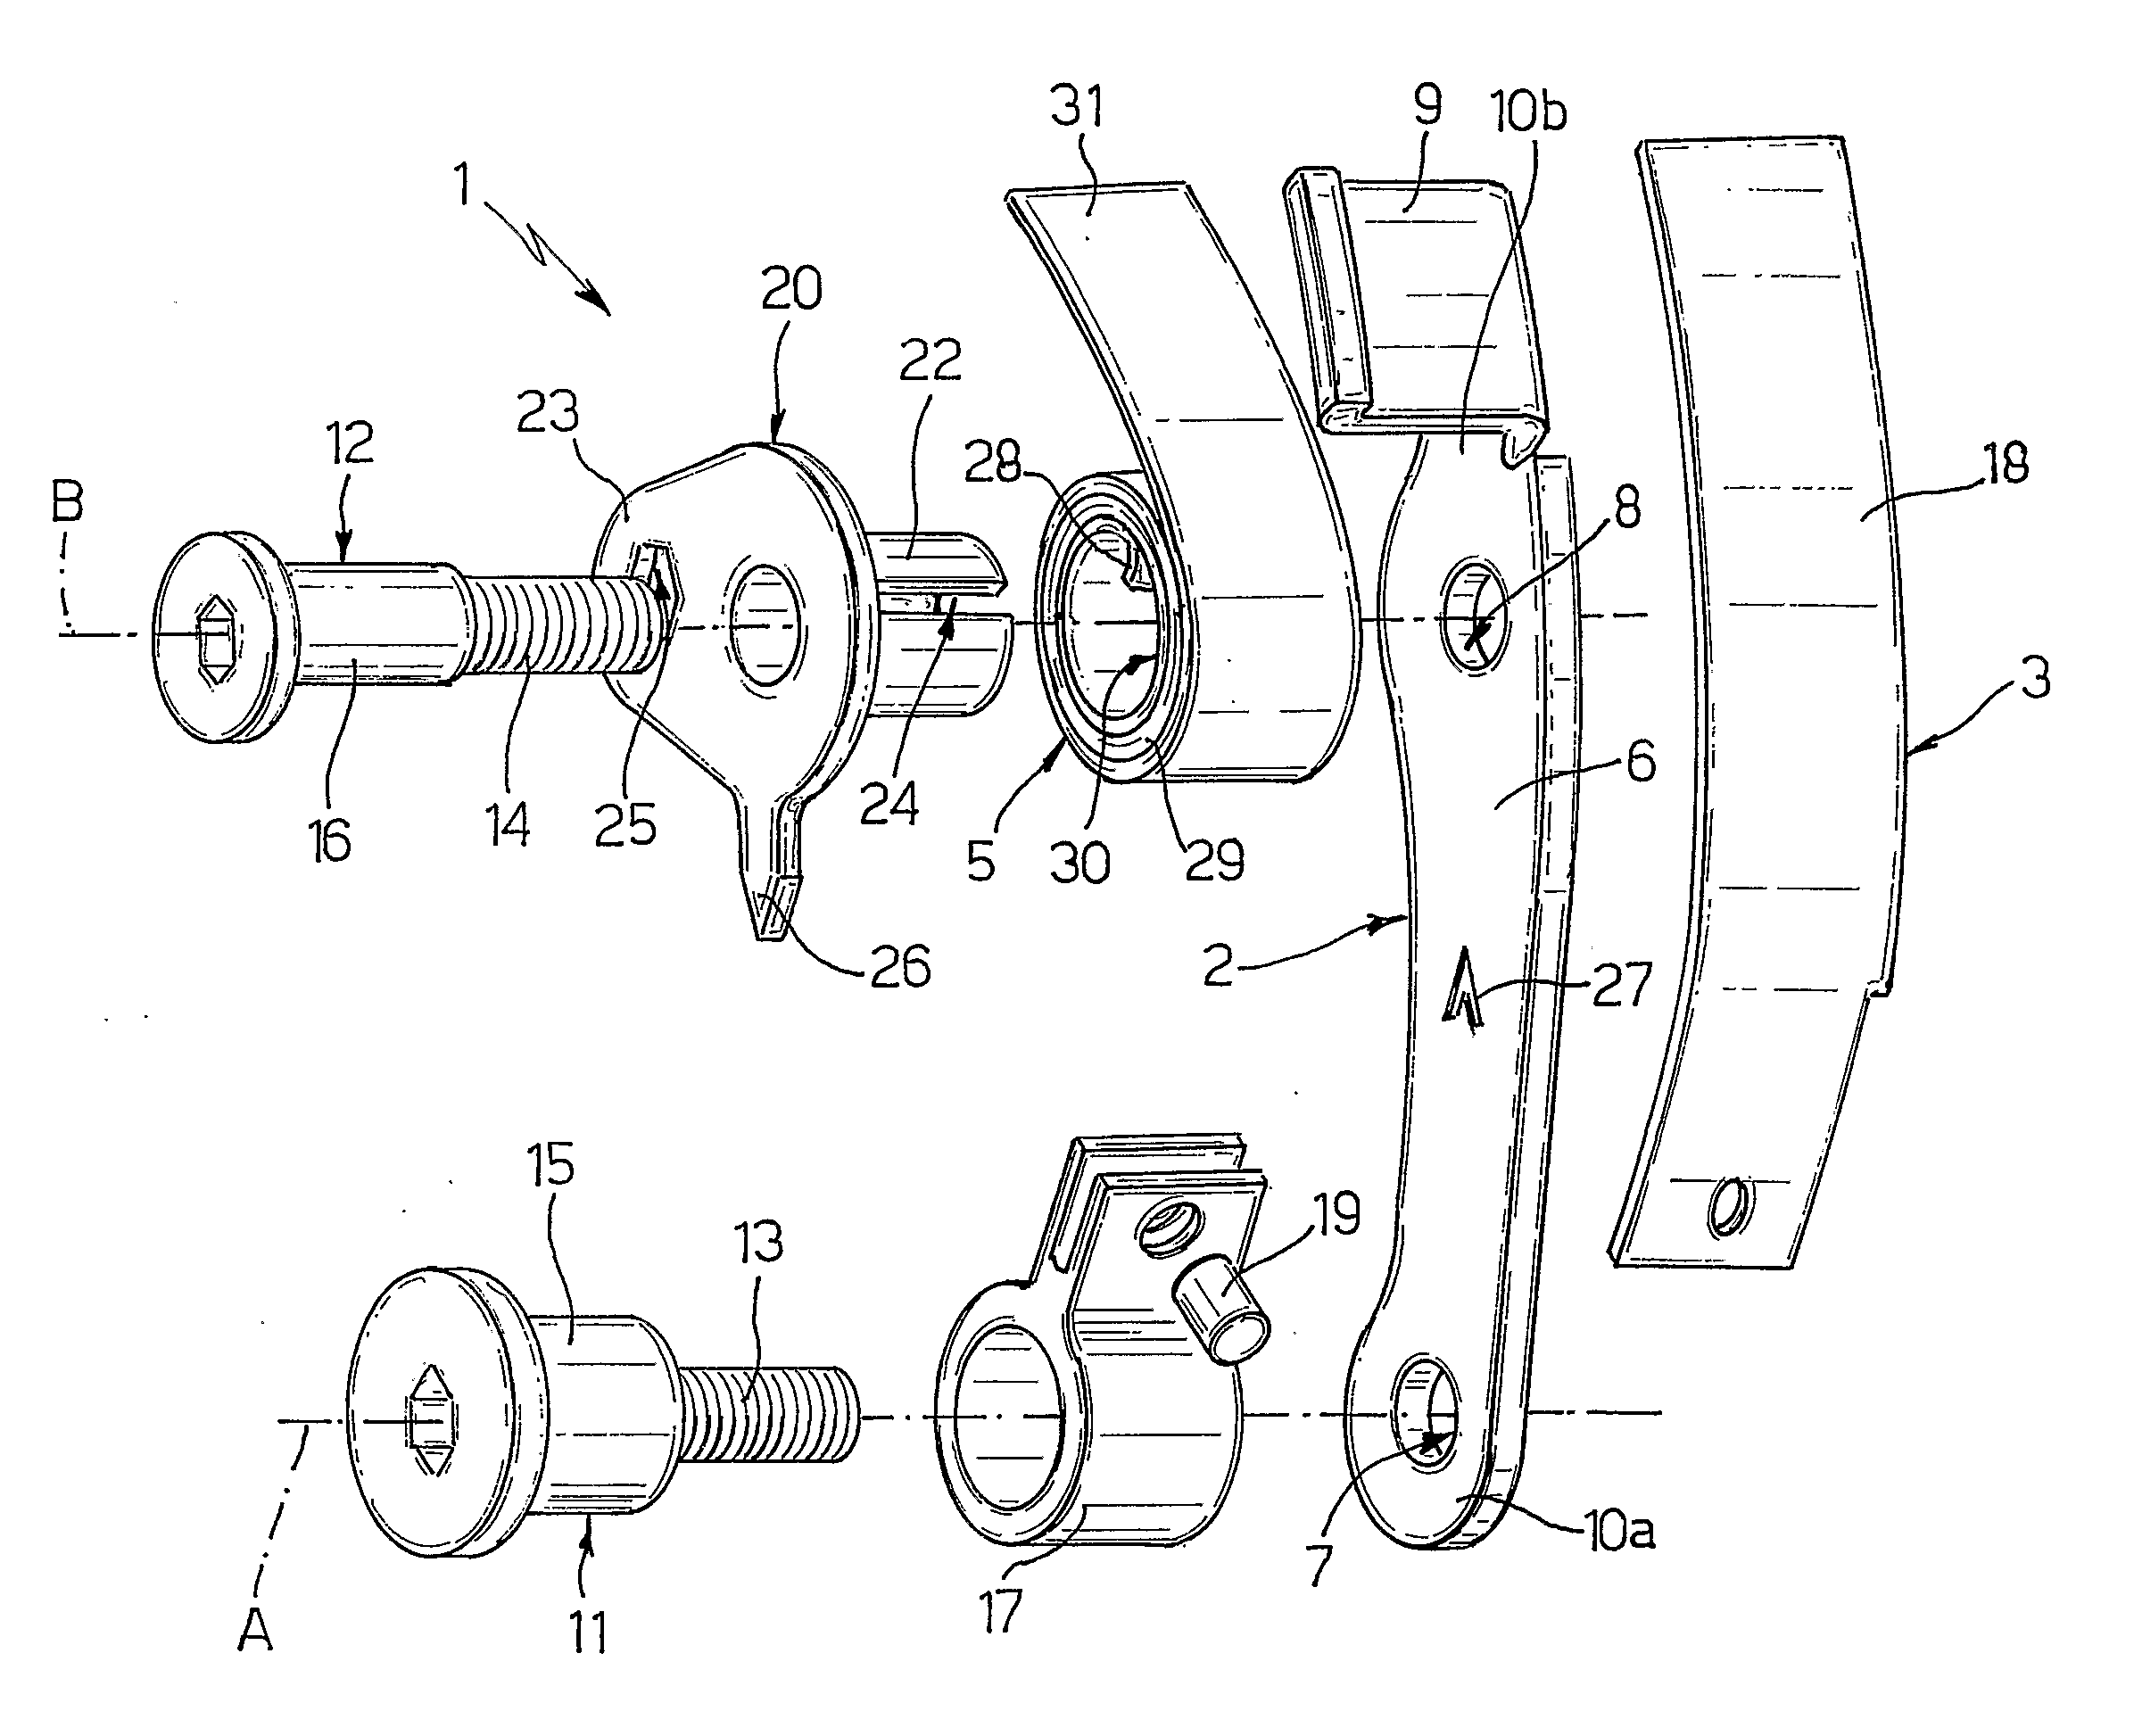 Shoe Tensioner for a Synchronous Belt Drive for Use With Oil